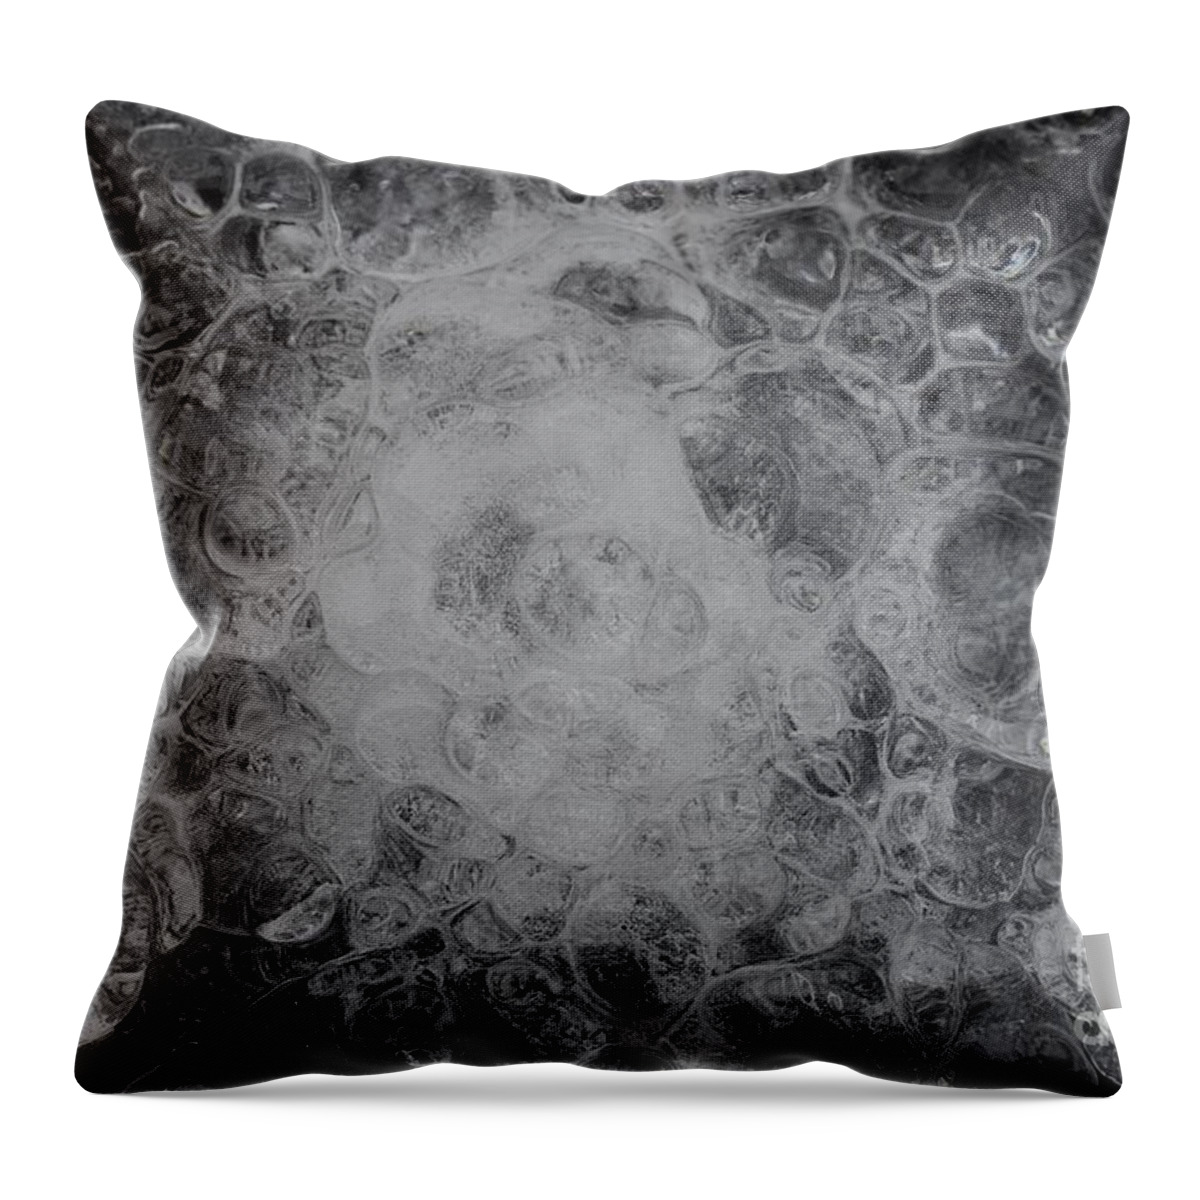 Ice Drops Throw Pillow featuring the photograph Drops Of Ice by Stefania Caracciolo